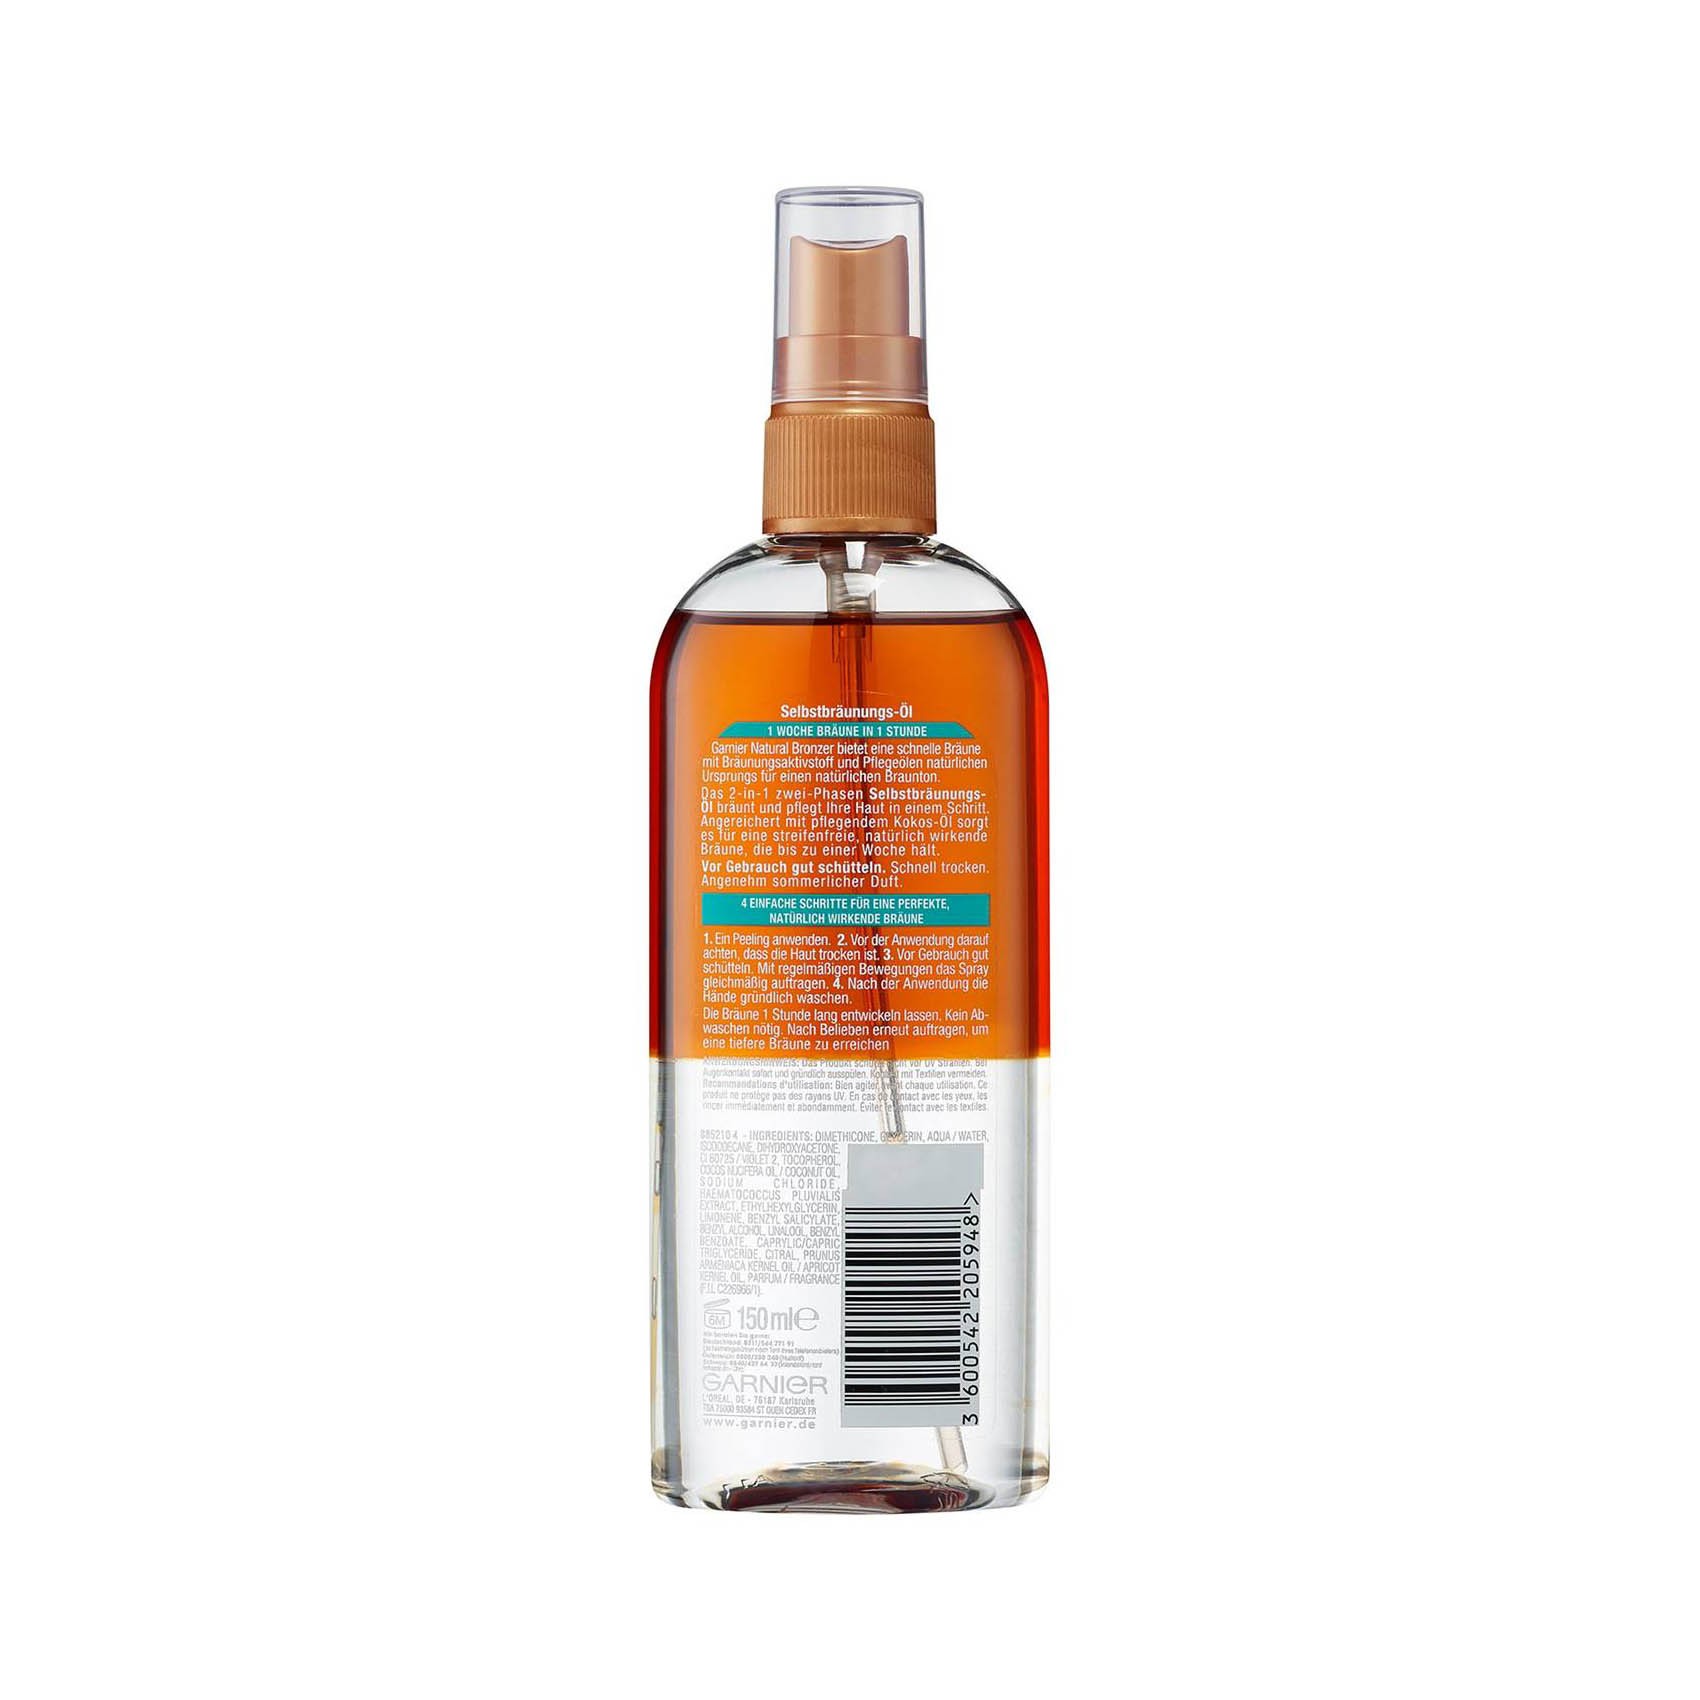 Self Tanning Oil - Ambre Solaire - Natural Bronzer